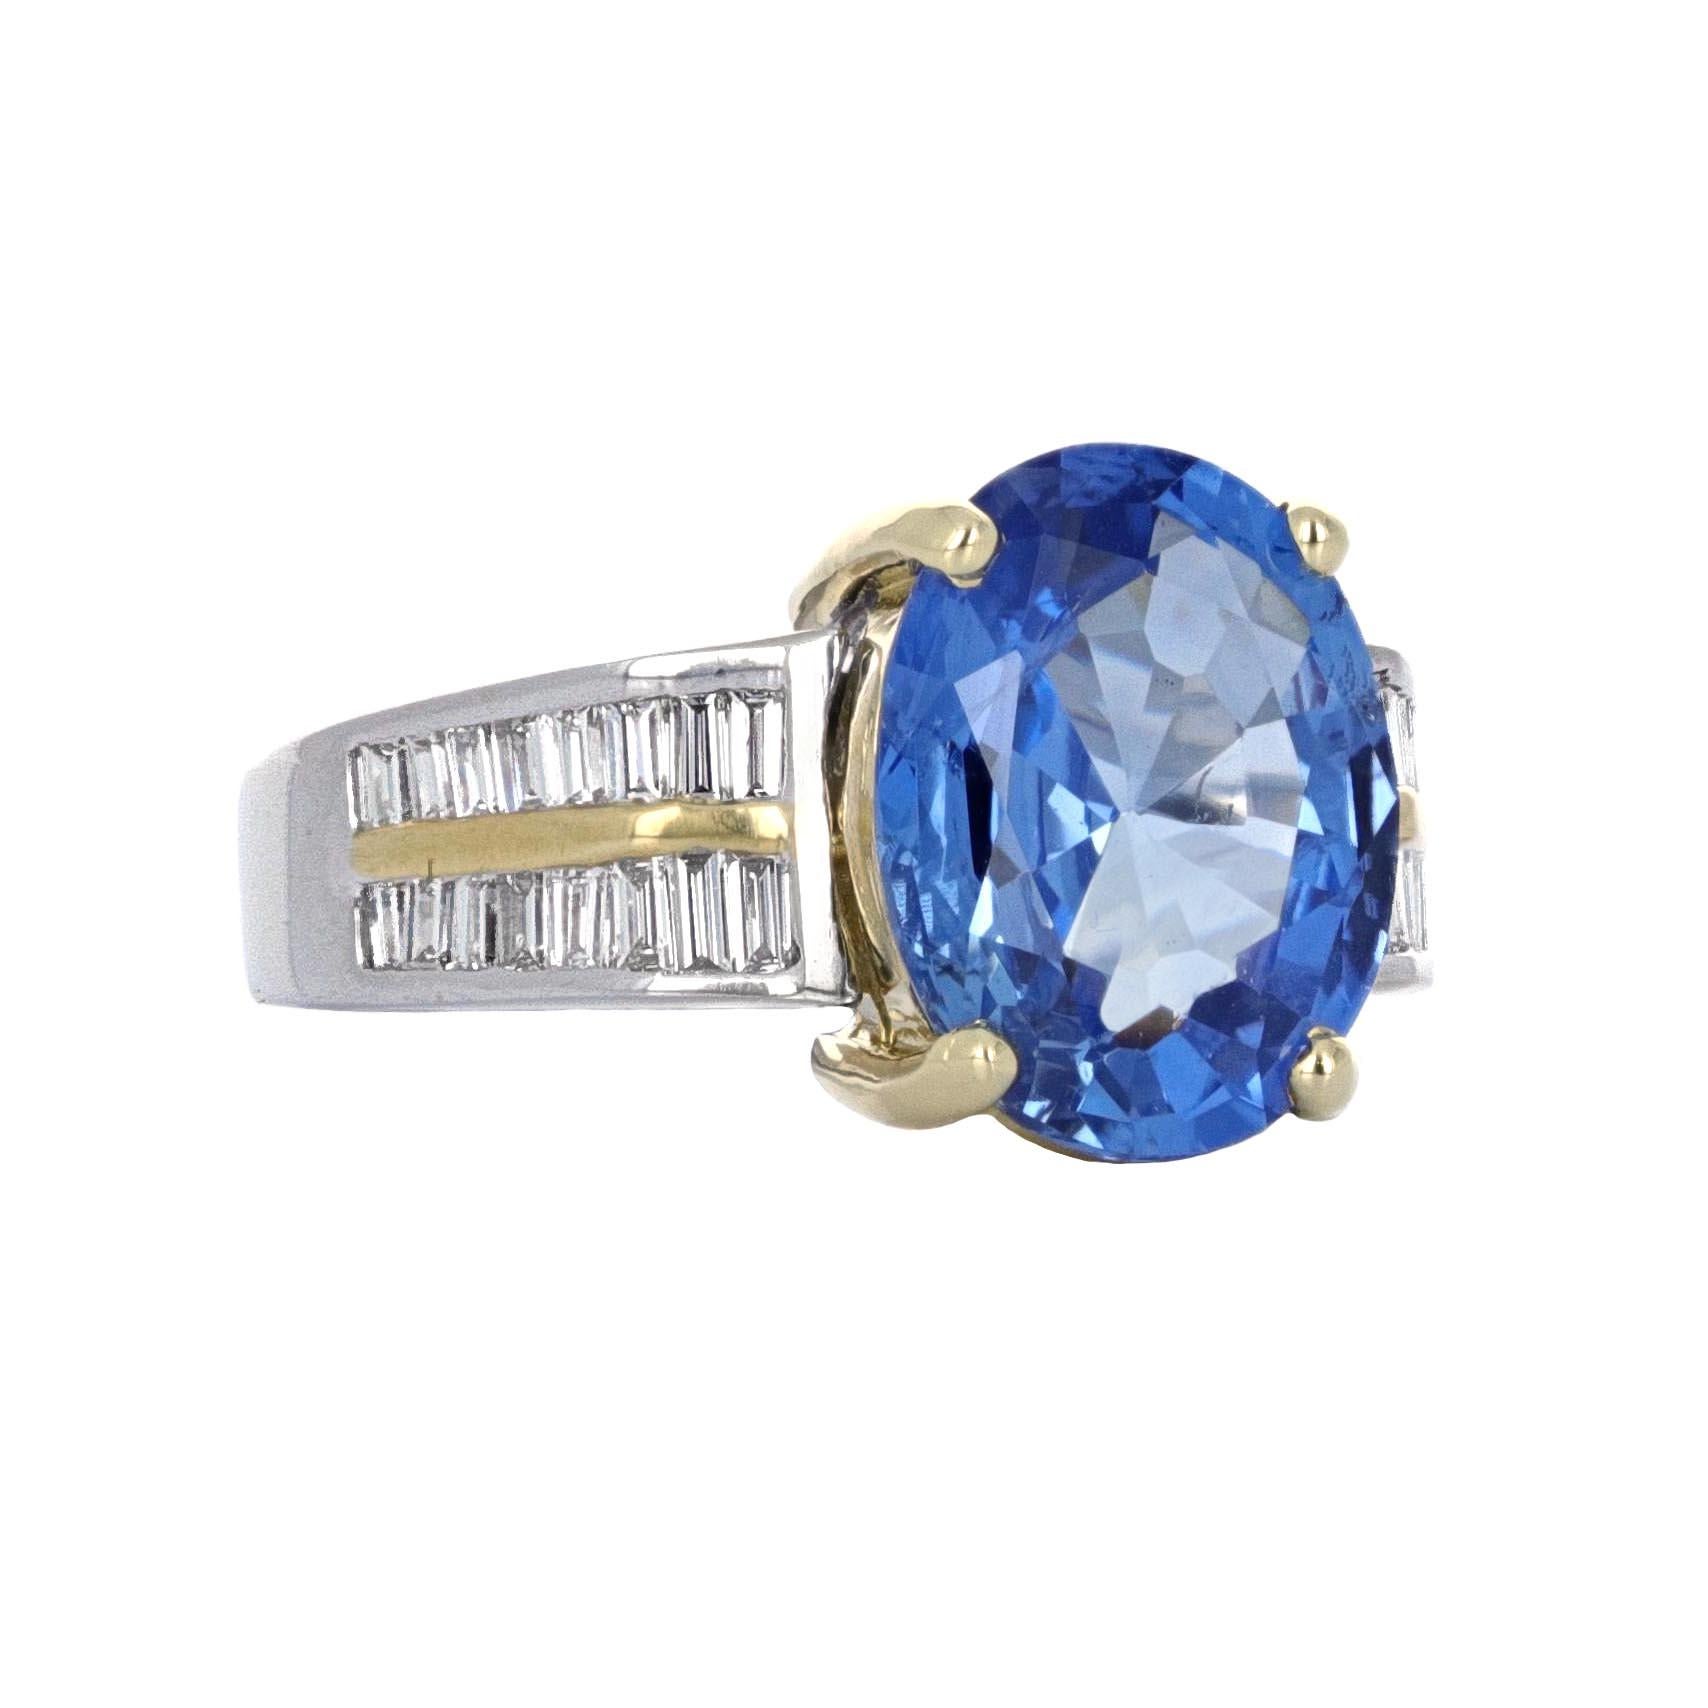 GIA certified 5.08 carat, sapphire and diamond 18 kartat cocktail ring. The ring is crafted in 18 karat white gold and 18 karat yellow gold. 
The GIA describes the stone as a natural oval shaped blue sapphire. It weighs 5.08 carats and measures